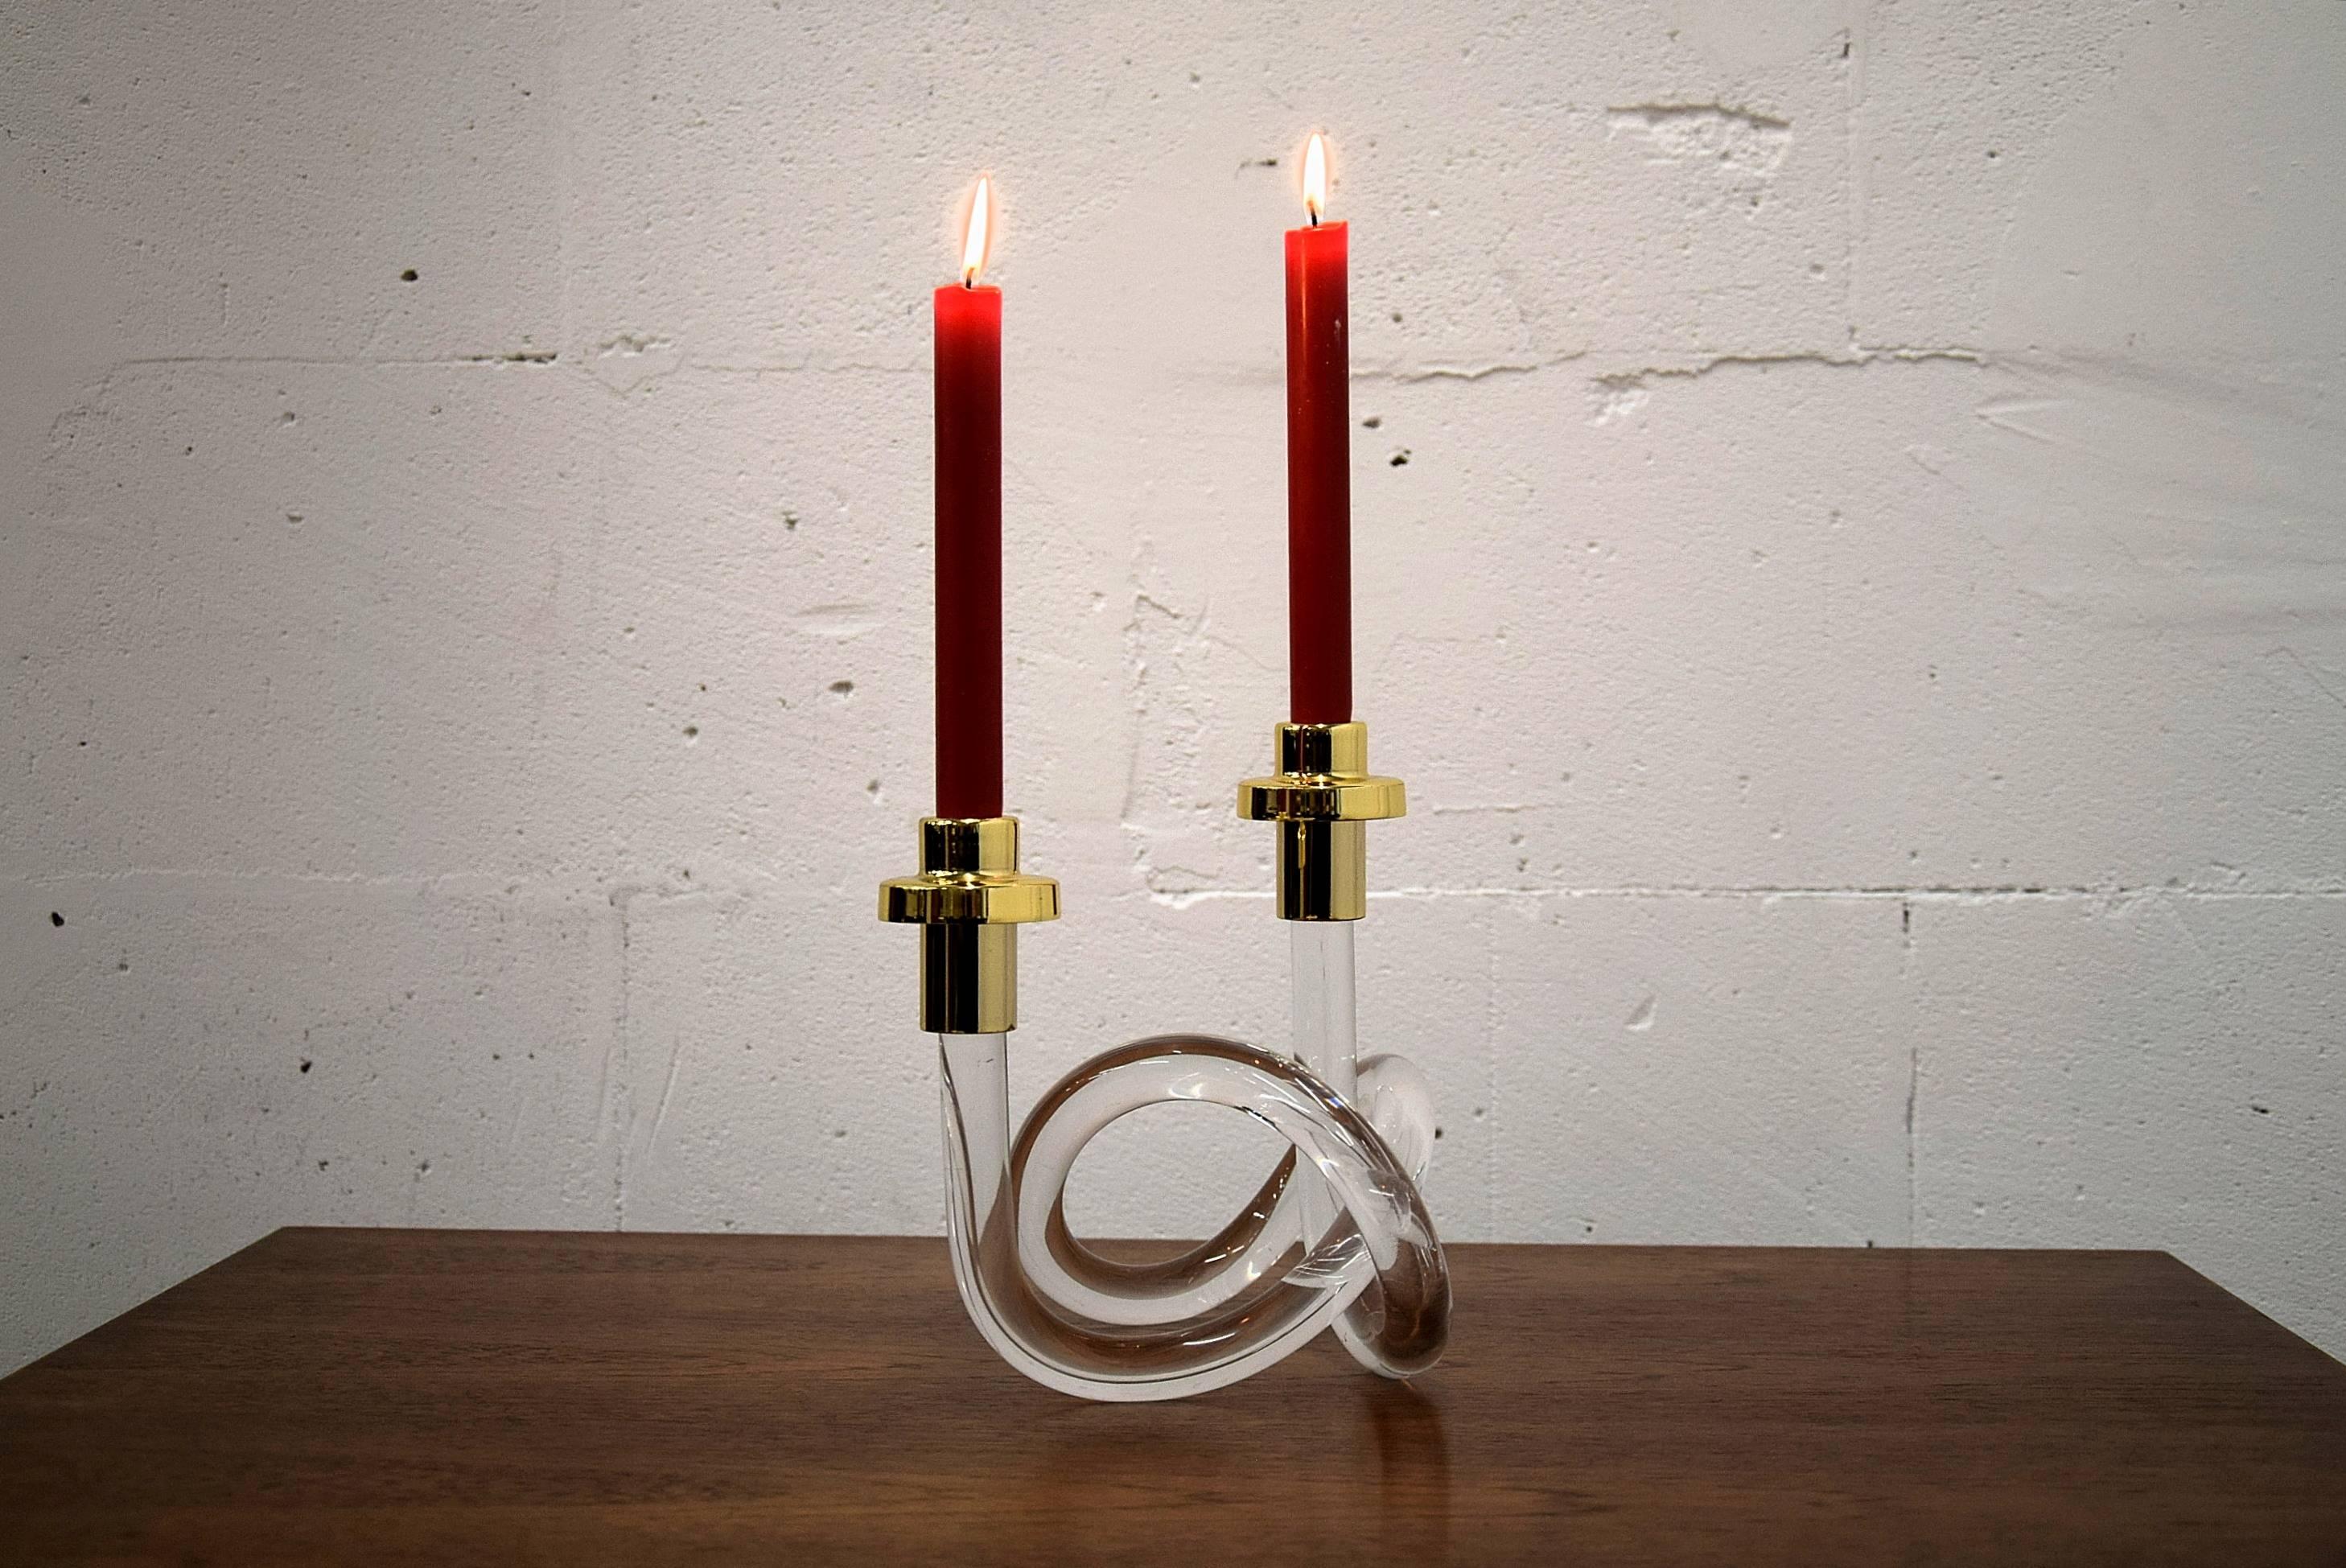 Double Lucite and gold Mid-Century candleholder by Dorothy Thorpe.

This elegant piece was created by Dorothy Thorpe in the early 1950s.

Measurements: H.23 x W.25 x D.25 cm.

Born in Salt Lake City in 1901, Dorothy Thorpe was a Mid-Century